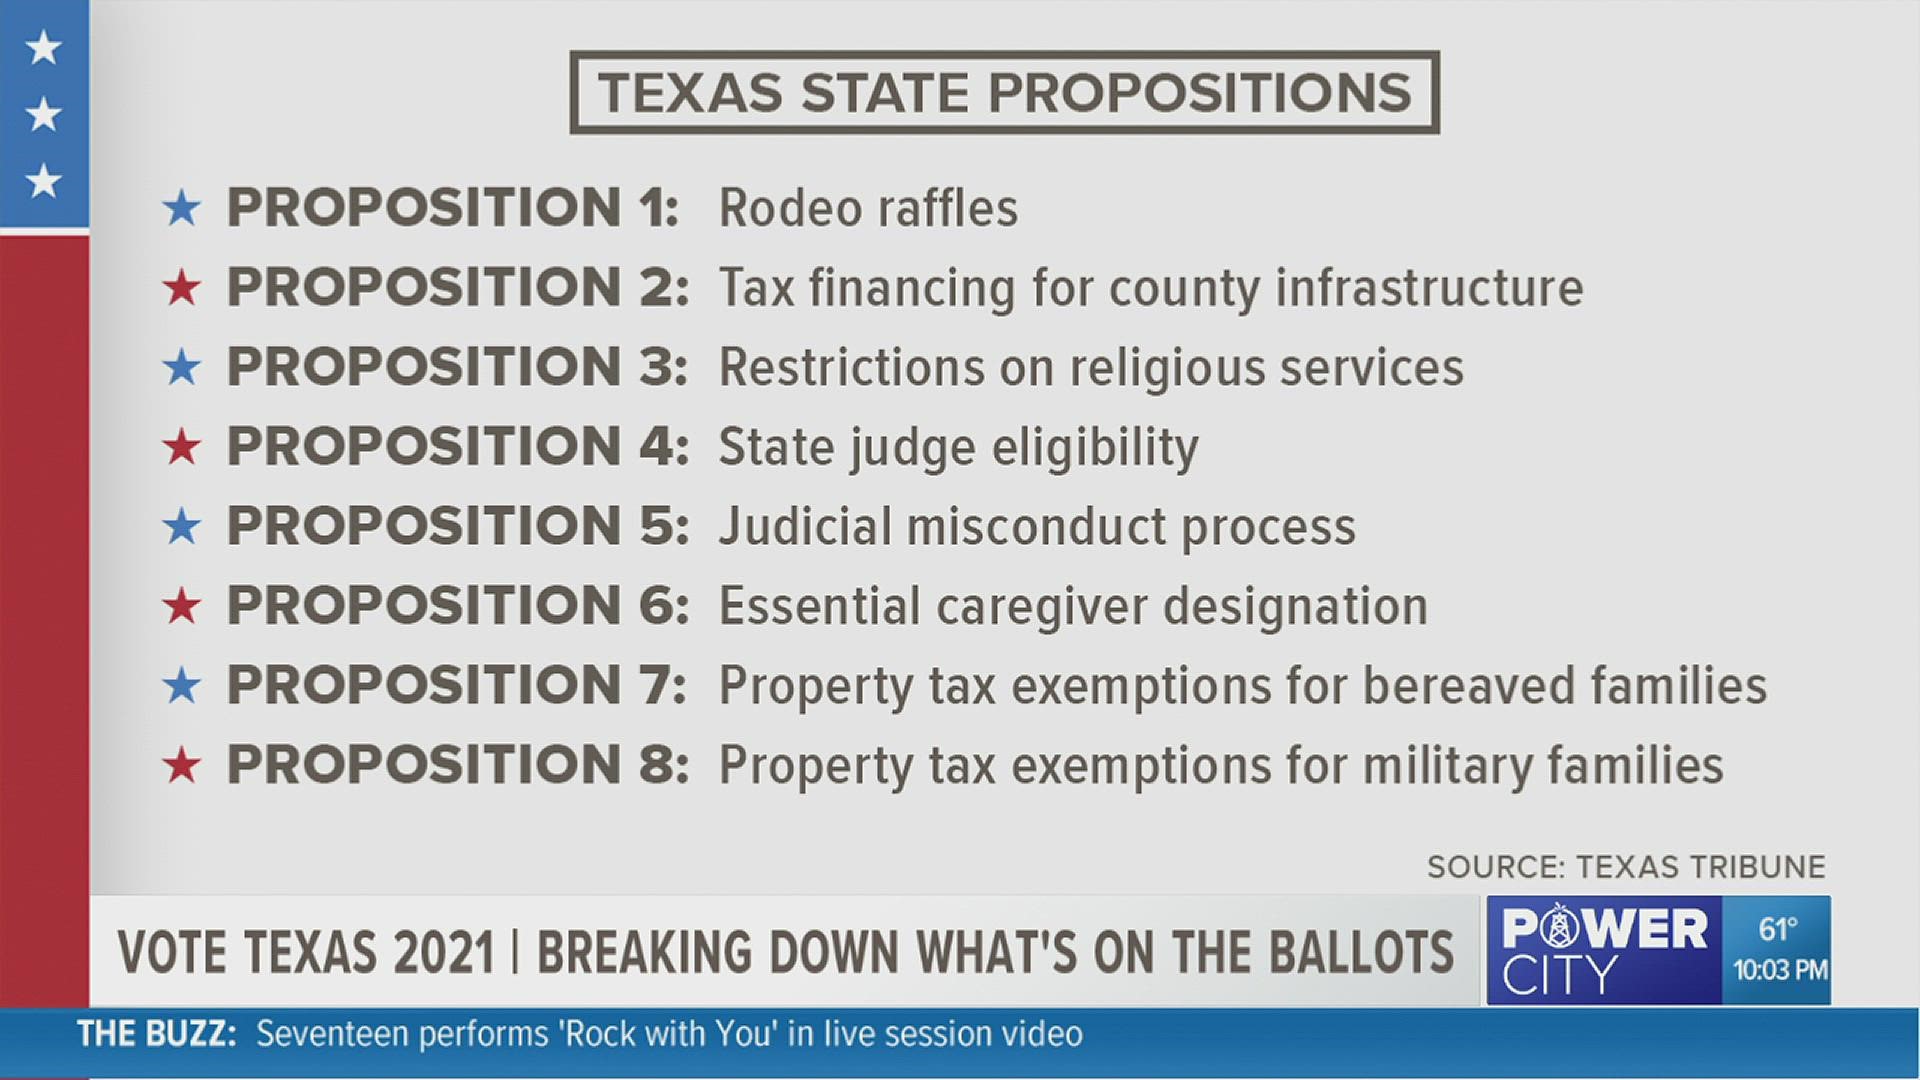 Texas state propositions on ballot for the 2021 Constitutional